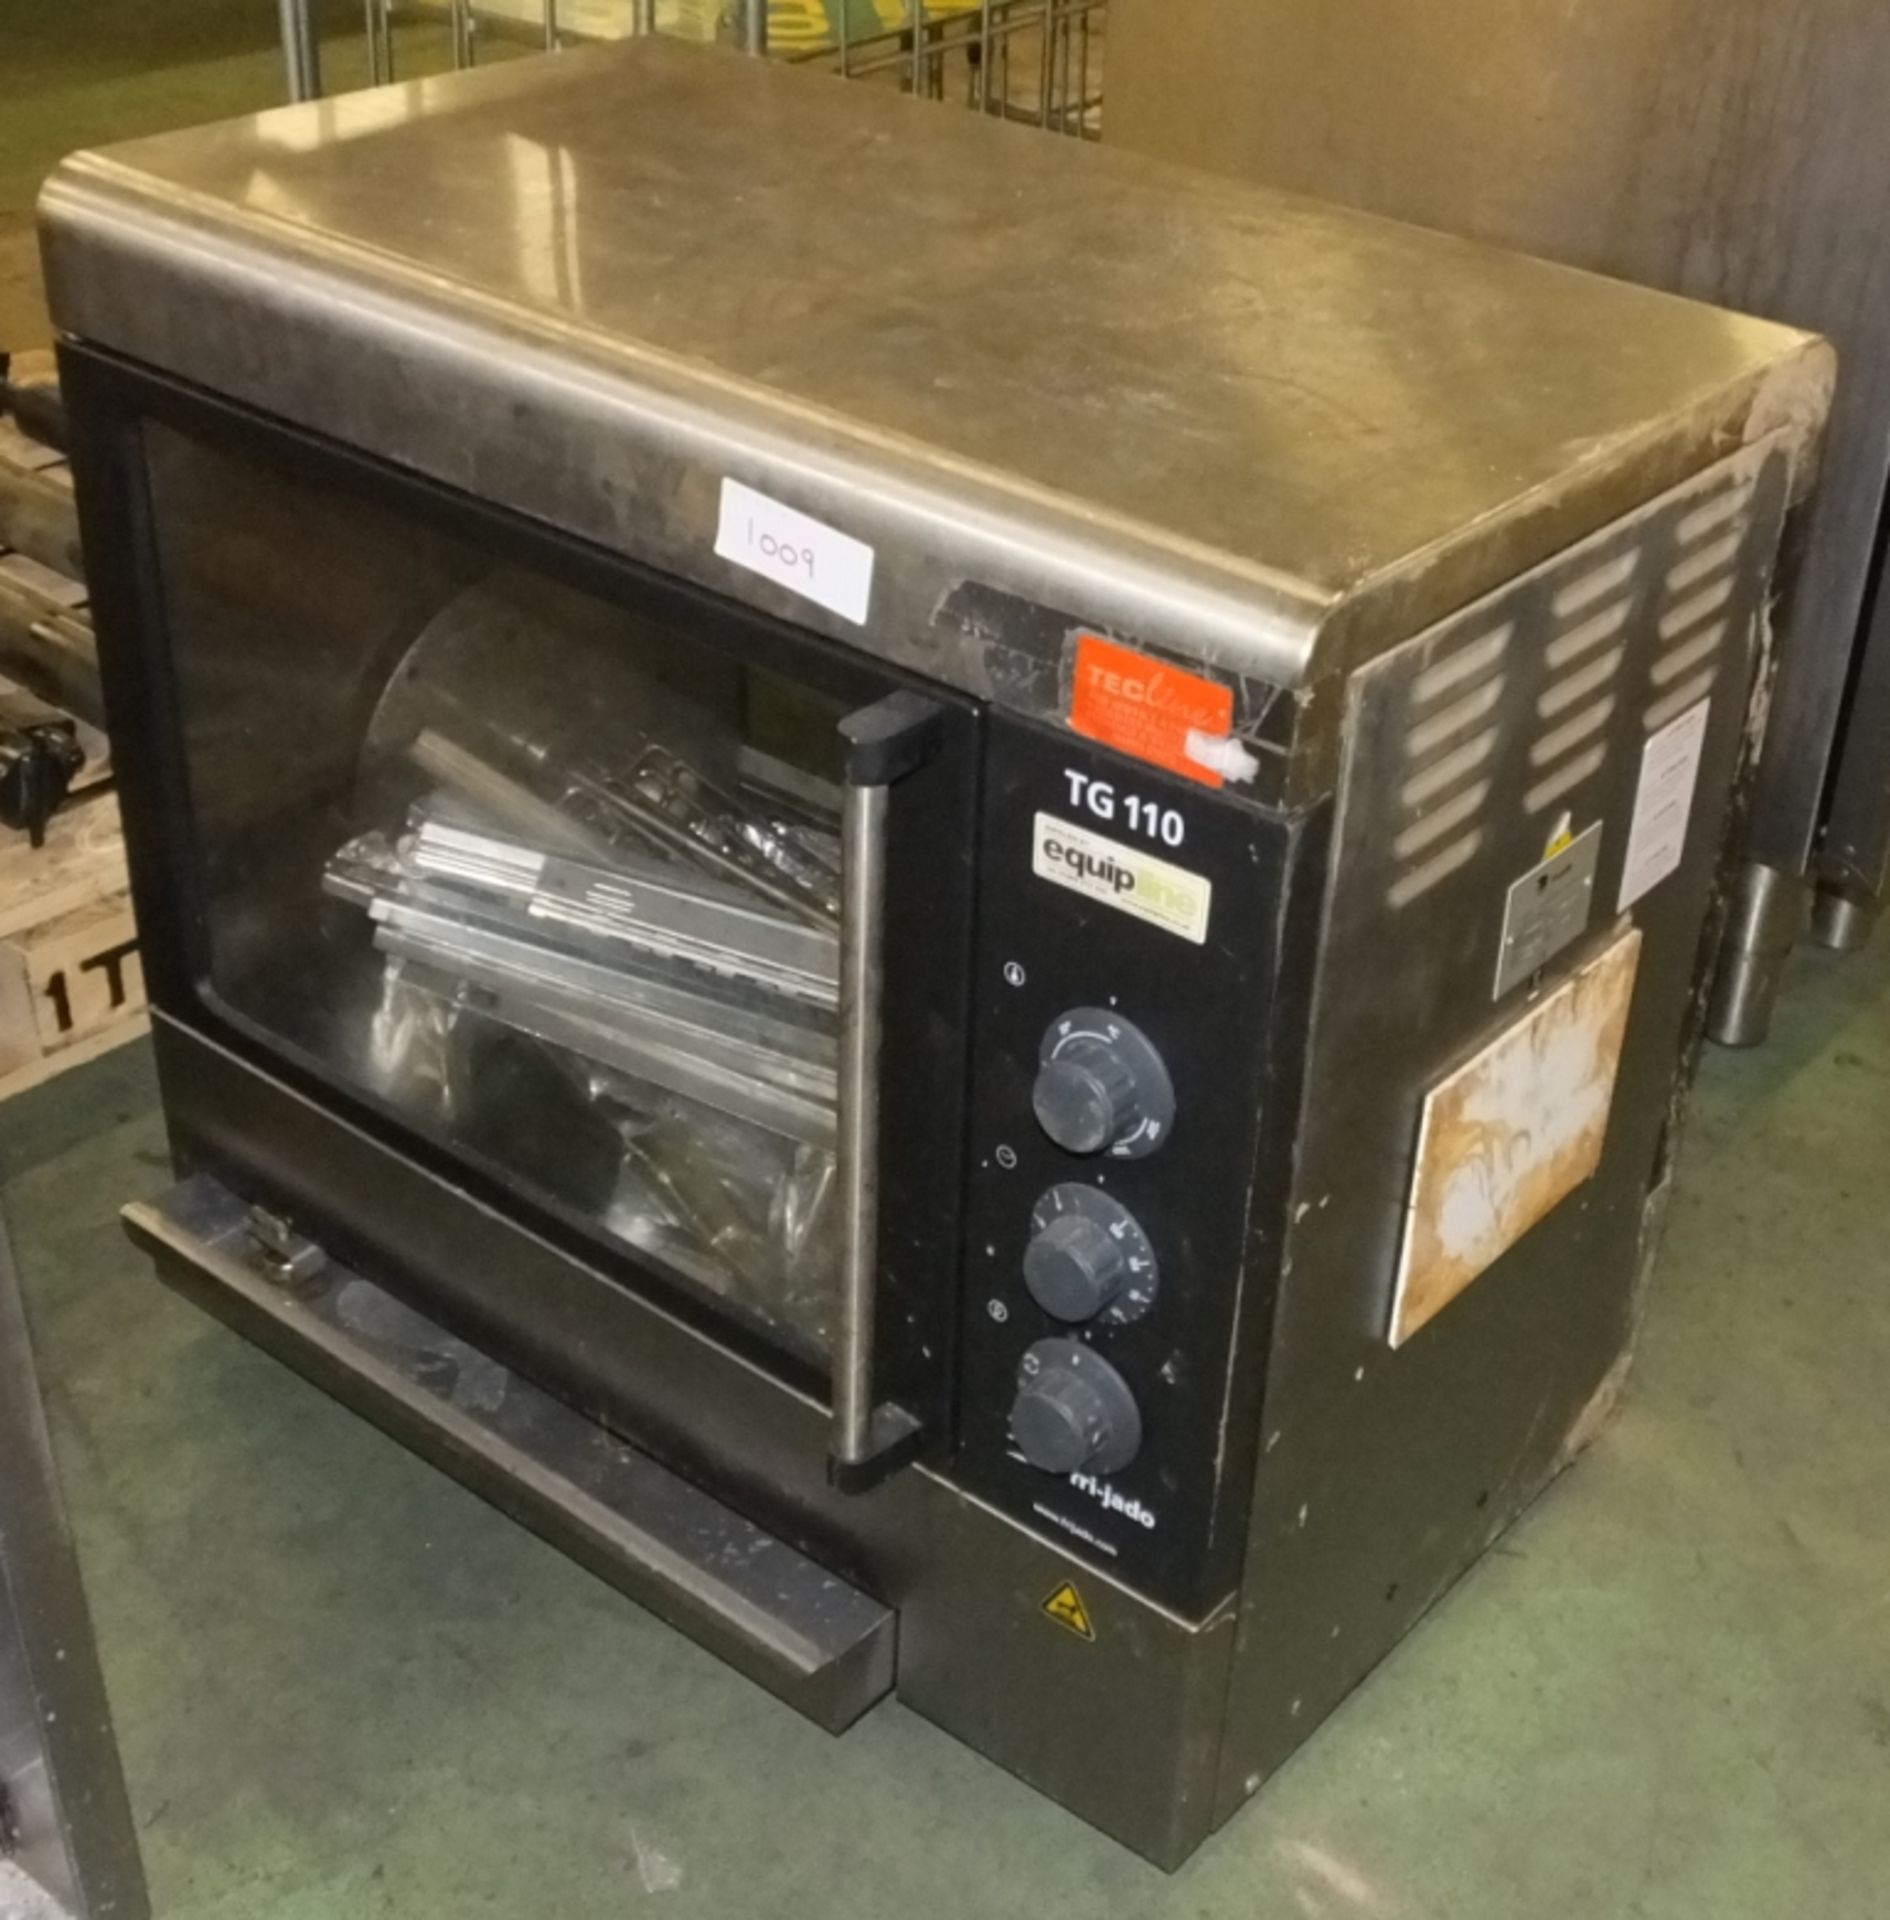 Rotisserie Oven (TF110-M) - Please note there will be a loading fee of £5 on this item - Image 2 of 7